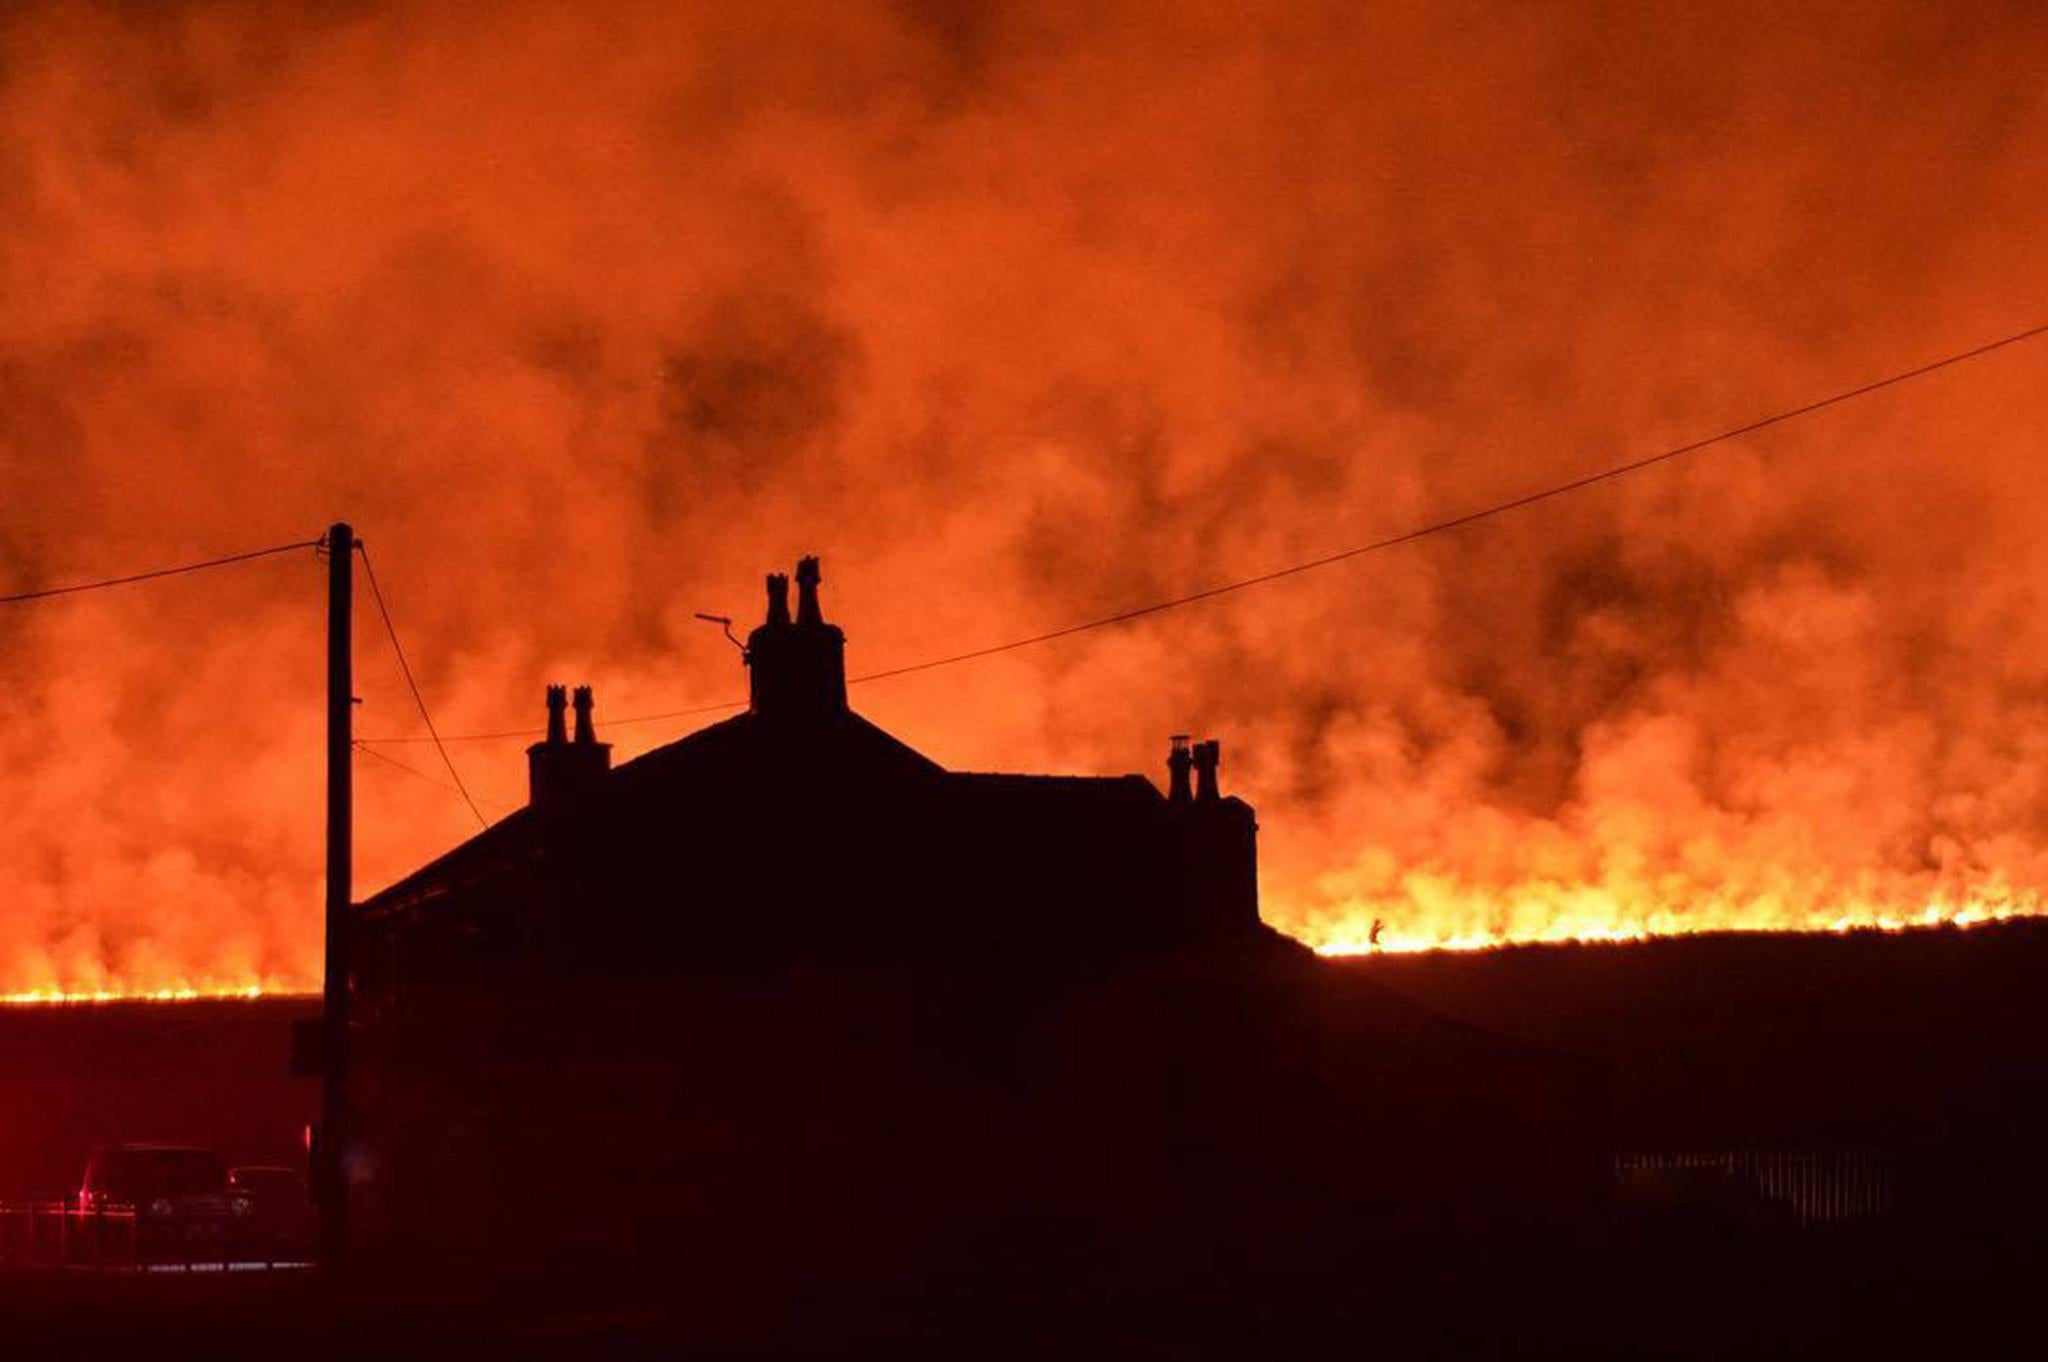 Fire at Saddleworth Moor on 26 February